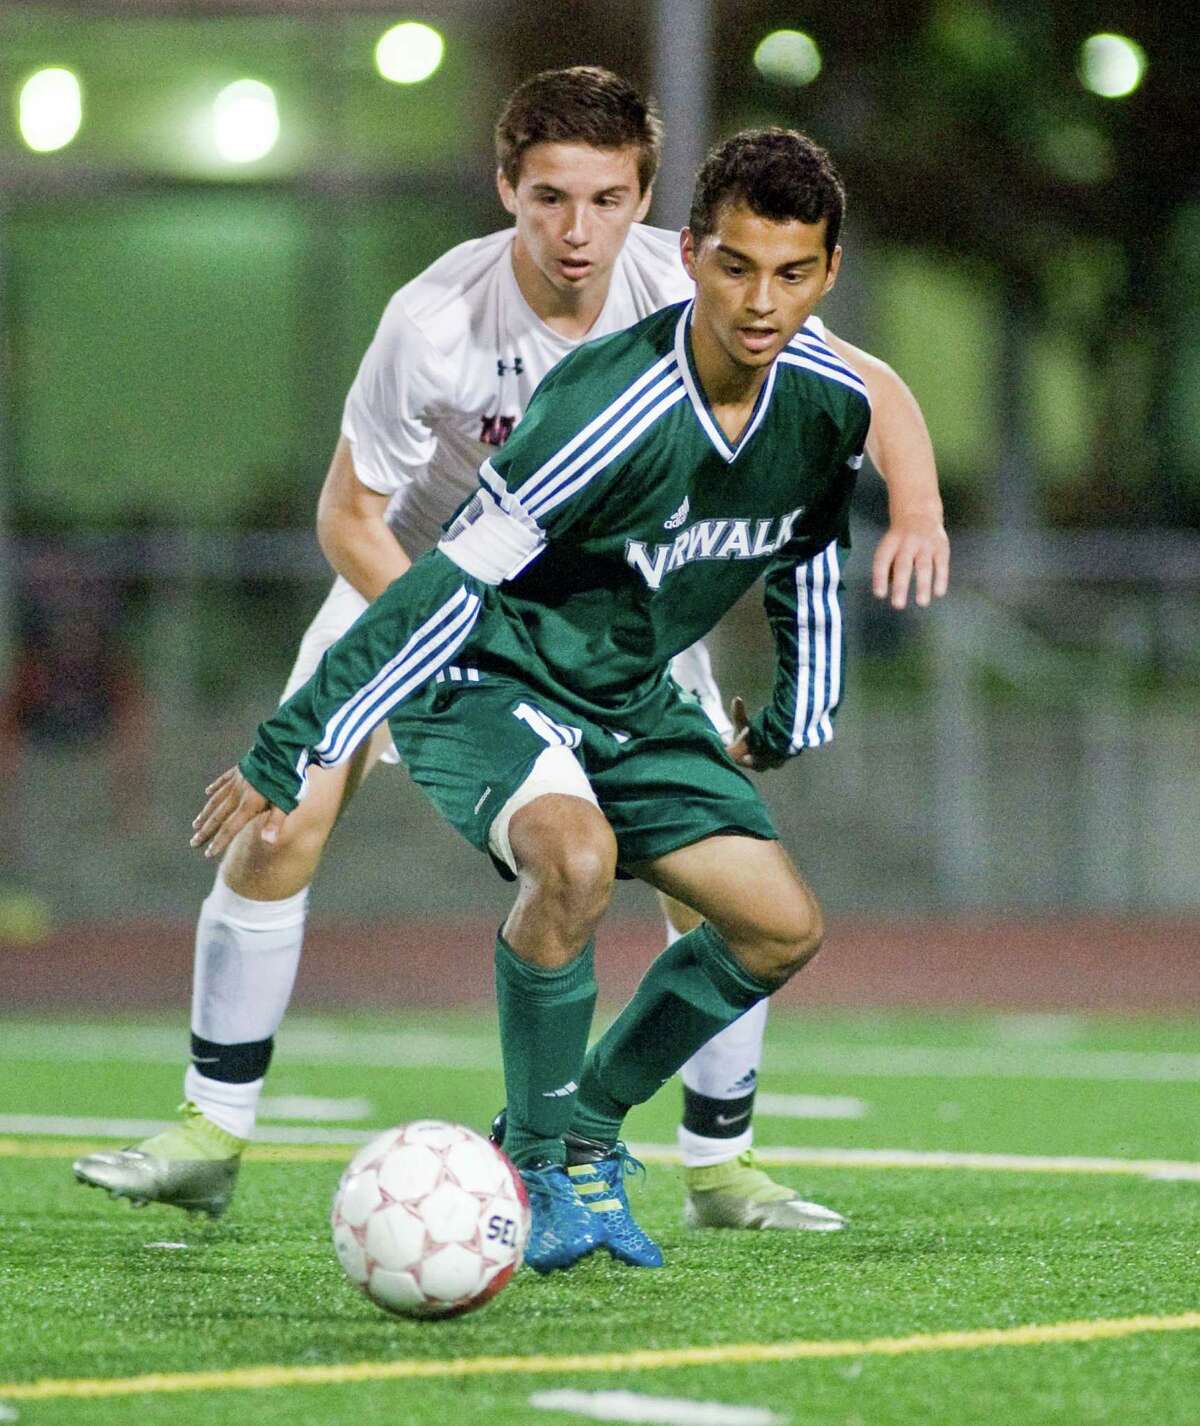 McMahon’s George Simpson and Norwalk’s Anthony Hernandez move in on the ball.